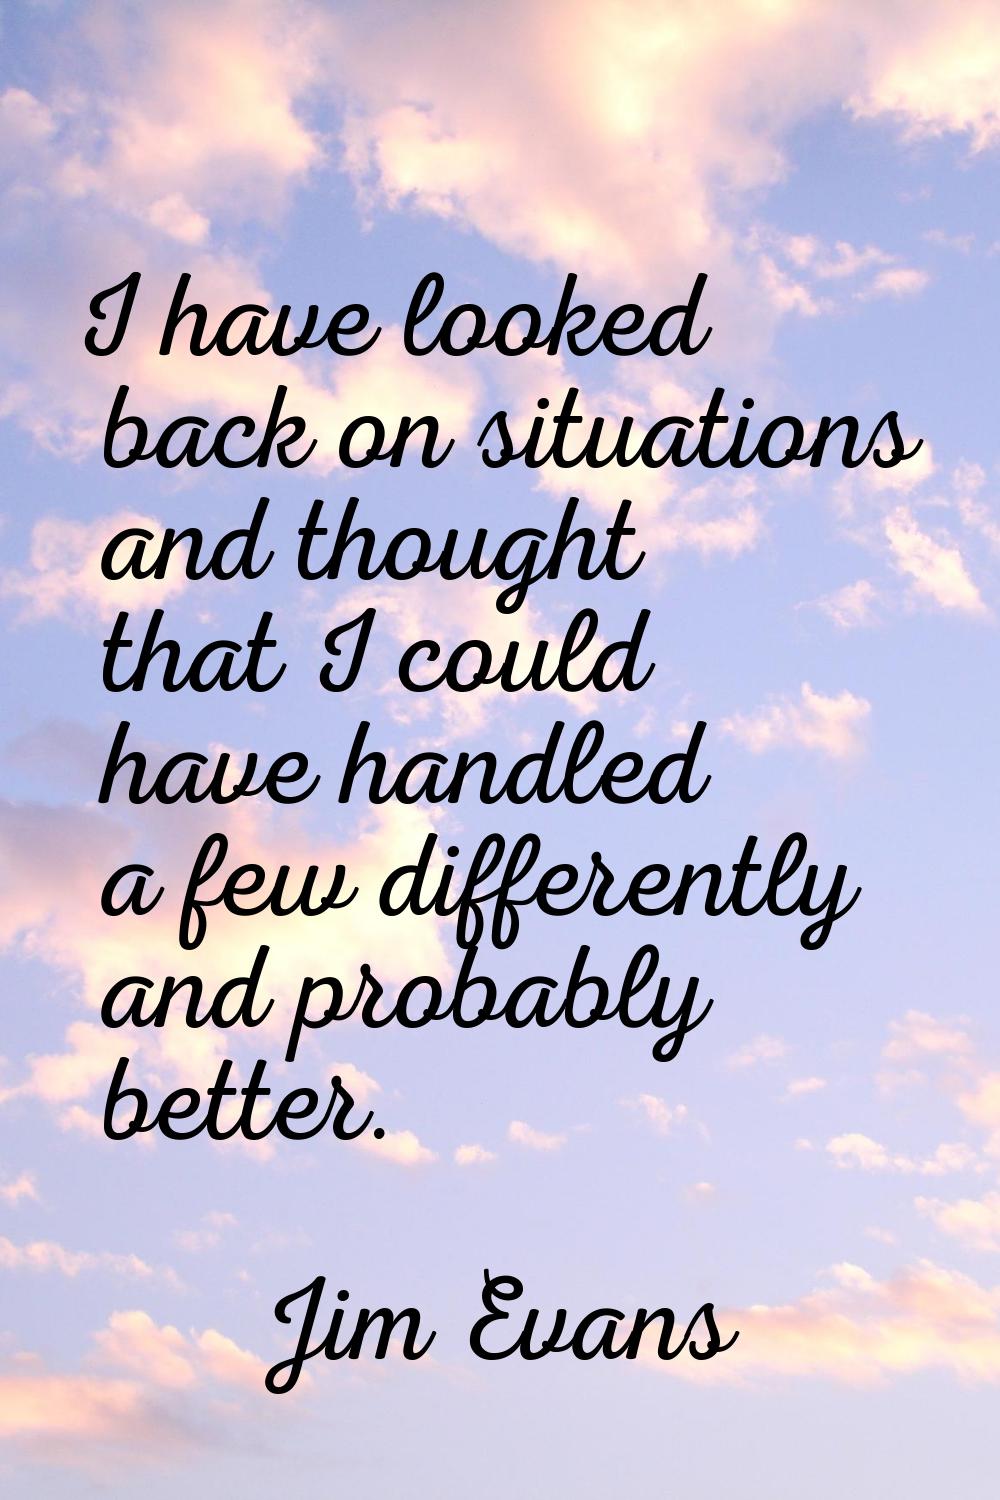 I have looked back on situations and thought that I could have handled a few differently and probab